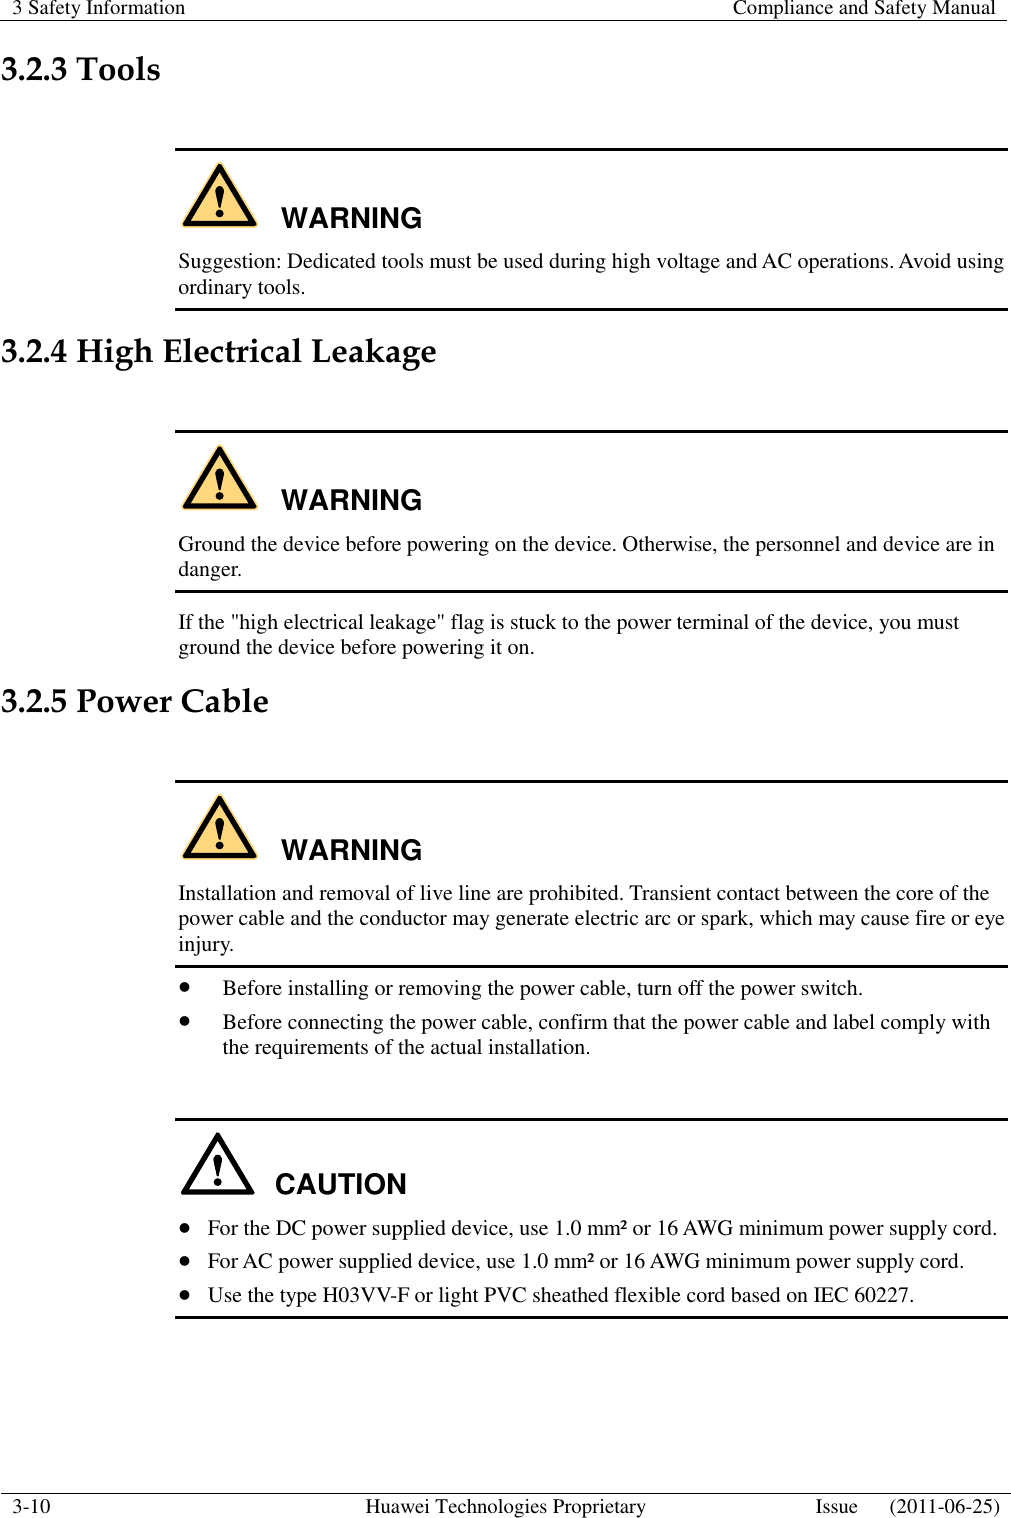 3 Safety Information    Compliance and Safety Manual  3-10 Huawei Technologies Proprietary Issue      (2011-06-25)  3.2.3 Tools  WARNING Suggestion: Dedicated tools must be used during high voltage and AC operations. Avoid using ordinary tools. 3.2.4 High Electrical Leakage  WARNING Ground the device before powering on the device. Otherwise, the personnel and device are in danger. If the &quot;high electrical leakage&quot; flag is stuck to the power terminal of the device, you must ground the device before powering it on. 3.2.5 Power Cable  WARNING Installation and removal of live line are prohibited. Transient contact between the core of the power cable and the conductor may generate electric arc or spark, which may cause fire or eye injury.  Before installing or removing the power cable, turn off the power switch.  Before connecting the power cable, confirm that the power cable and label comply with the requirements of the actual installation.  CAUTION  For the DC power supplied device, use 1.0 mm² or 16 AWG minimum power supply cord.  For AC power supplied device, use 1.0 mm² or 16 AWG minimum power supply cord.  Use the type H03VV-F or light PVC sheathed flexible cord based on IEC 60227.  